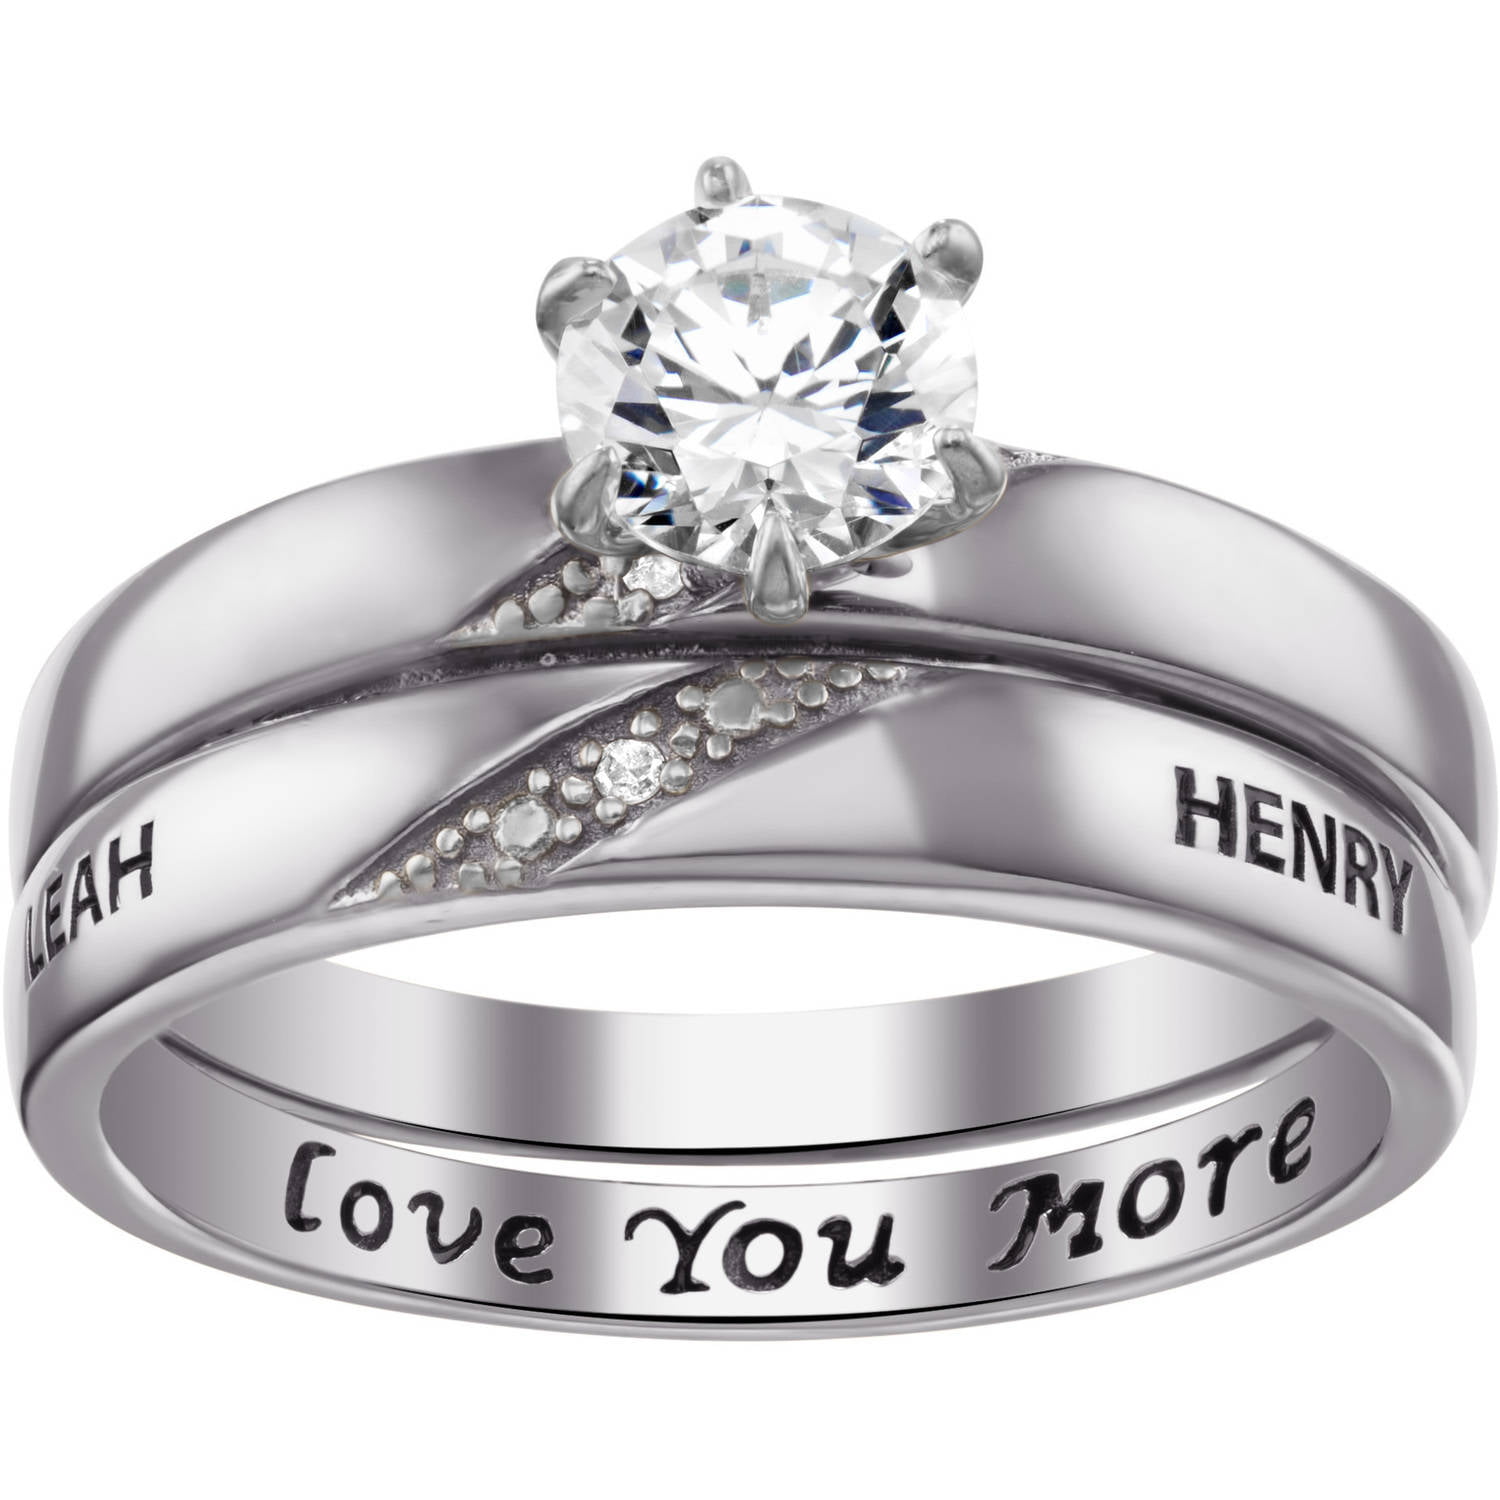 ONLINE Personalized Round CZ and Diamond Sterling Silver